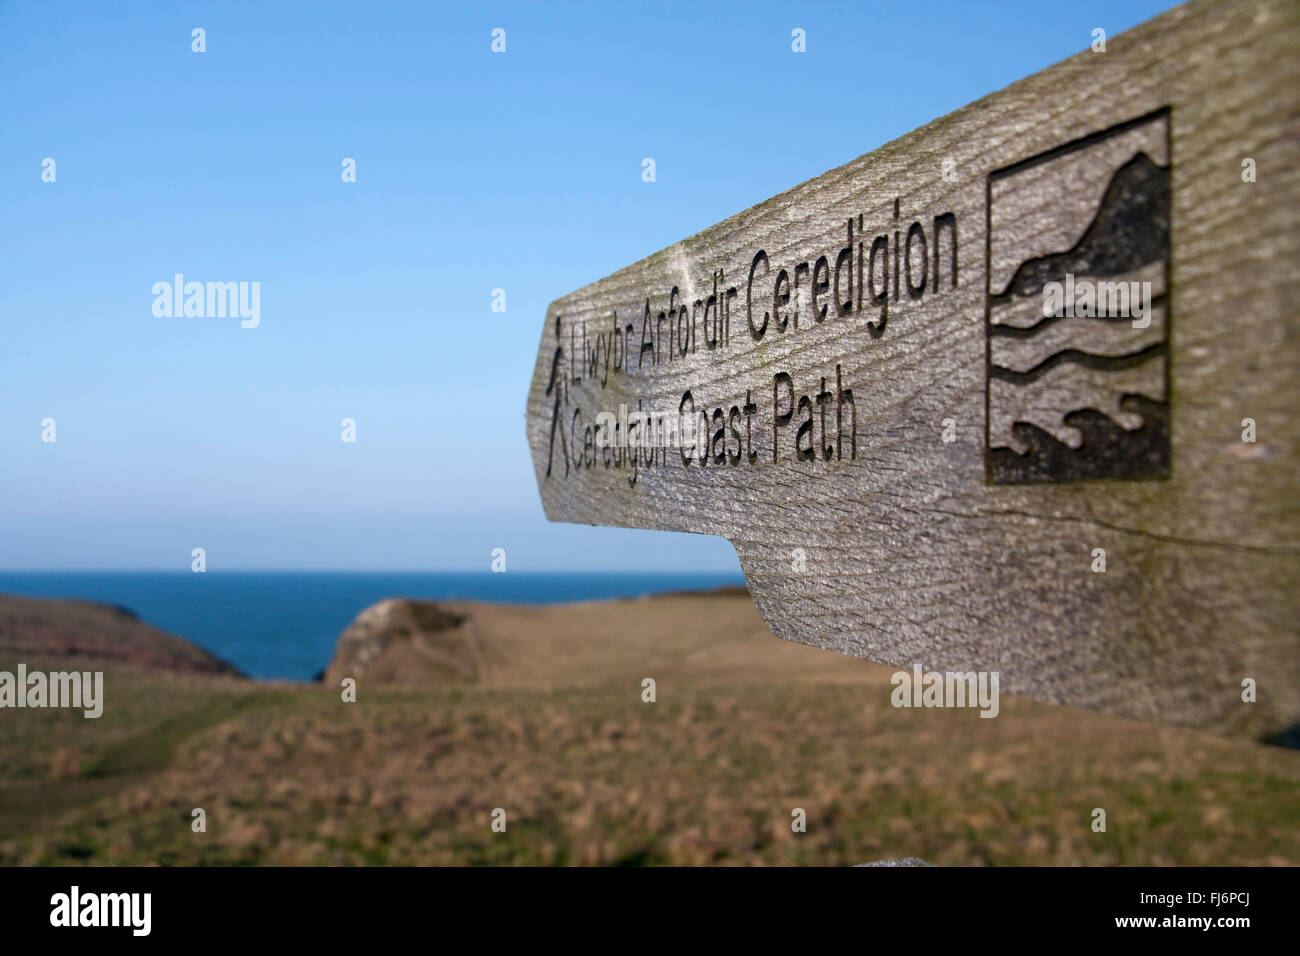 Ceredigion Coast Path sign with sea in background Cardigan Bay Mid Wales UK Stock Photo